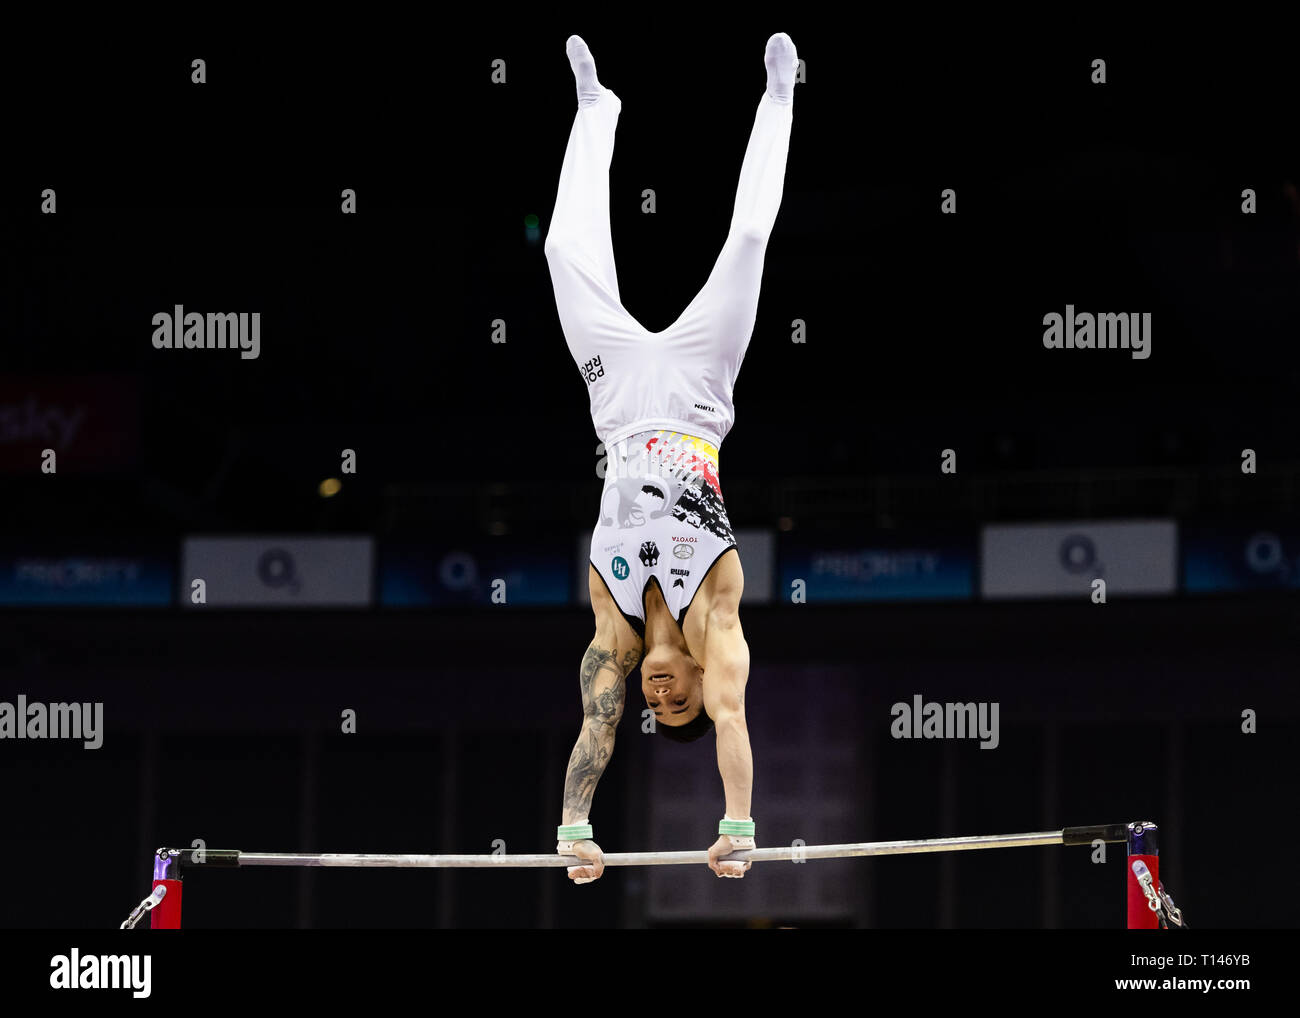 London, UK. 23rd March, 2019. Marcel Nguyen performs High Bar during the Matchroom Multisport presents the 2019 Superstars of Gymnastics at The O2 Arena on Saturday, 23 March 2019. LONDON ENGLAND. Credit: Taka G Wu/Alamy News Stock Photo